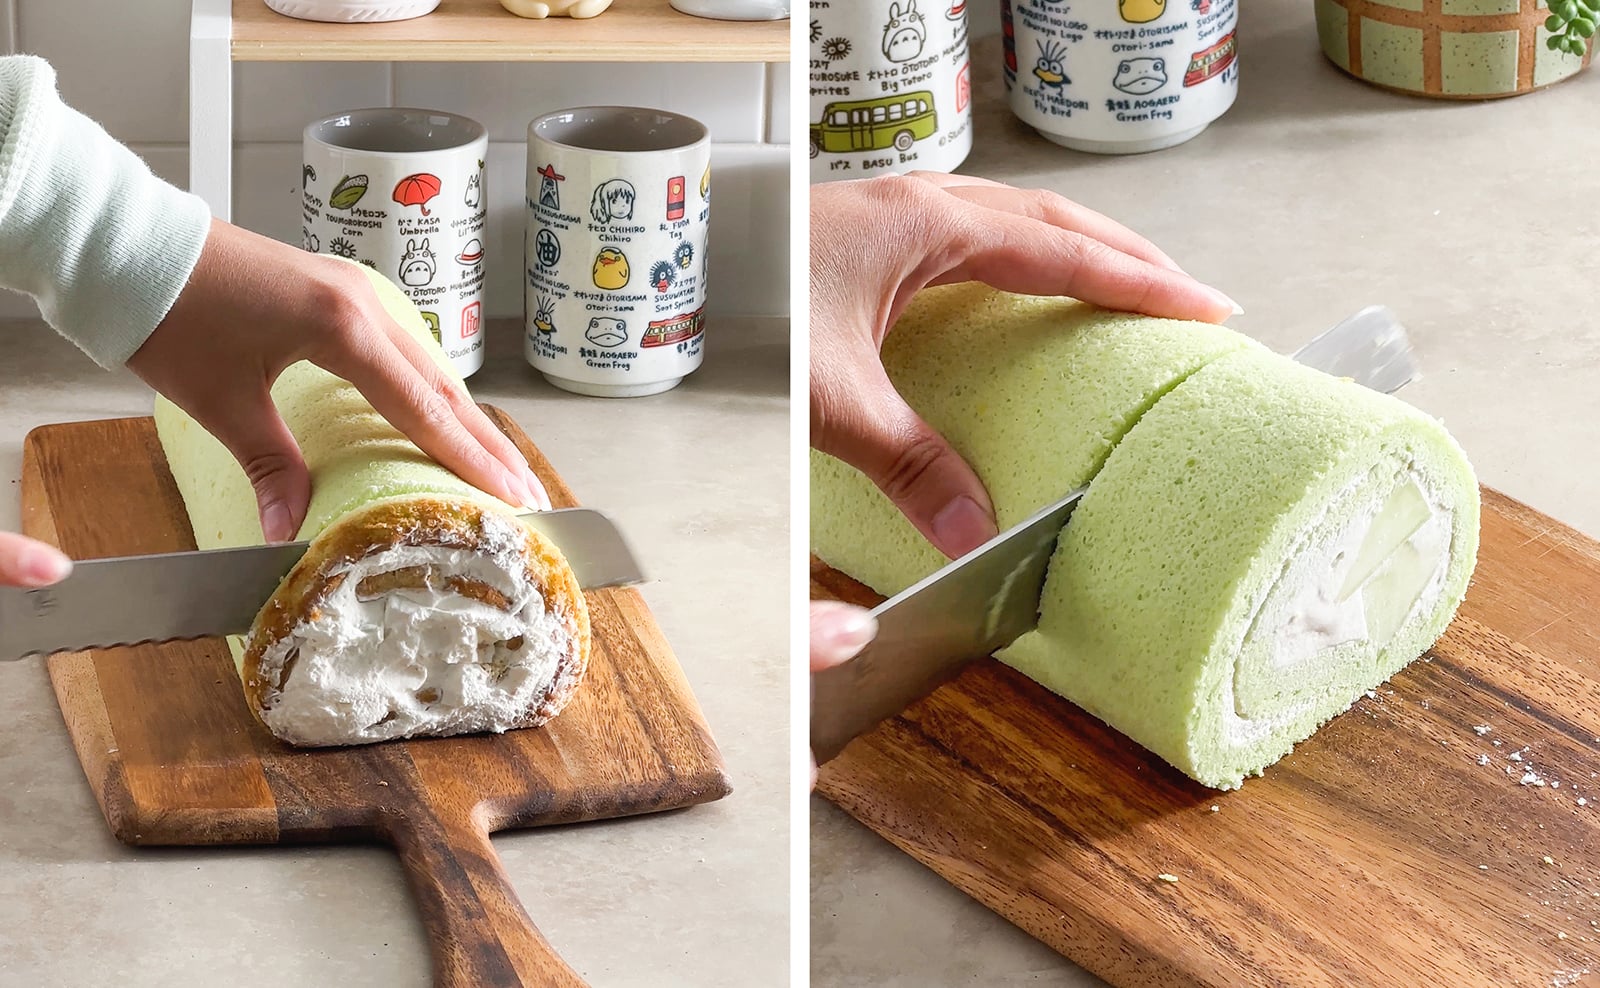 Left to right: slicing the end off of a cake roll, slicing thick slices from a roll cake.